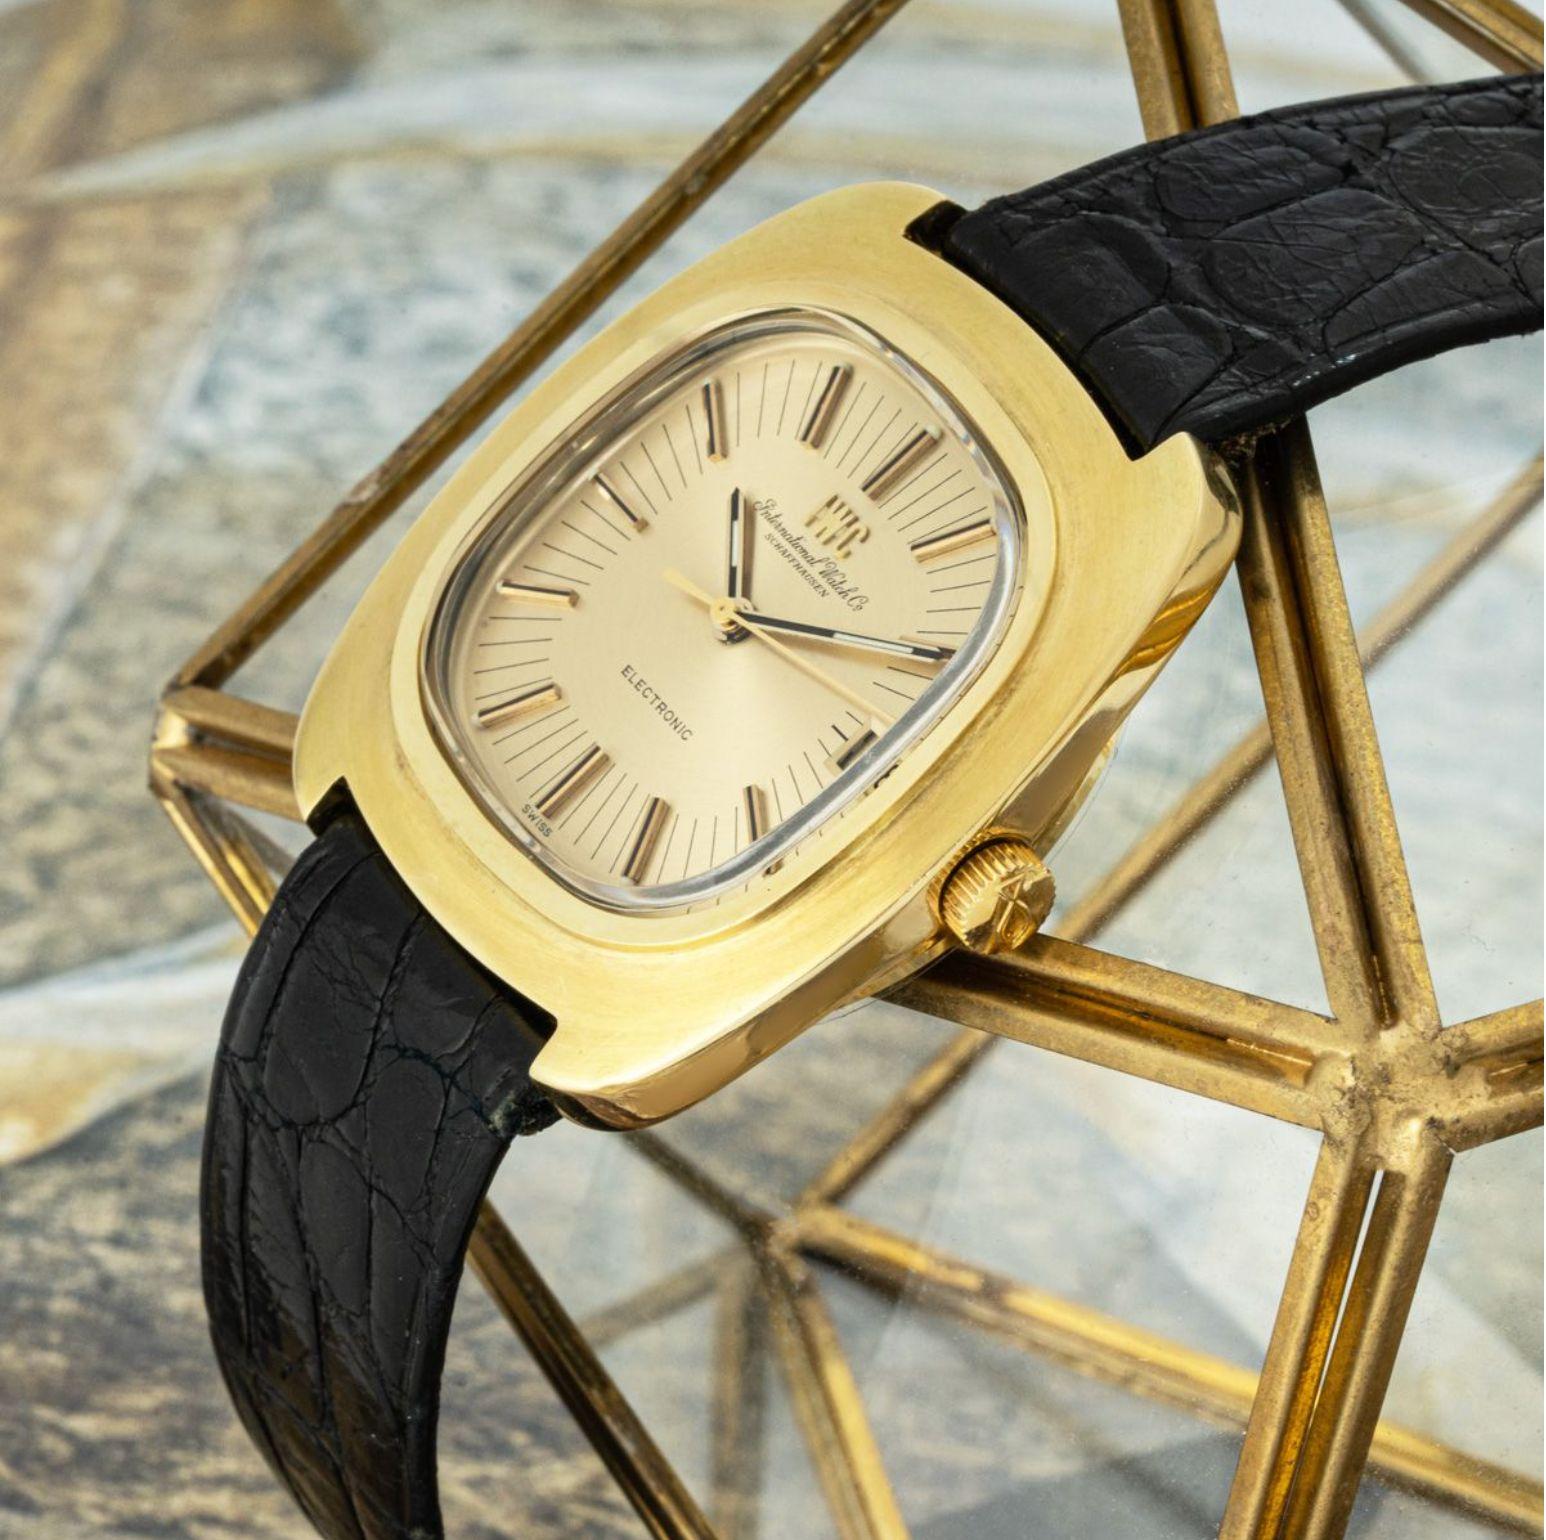 A mens yellow gold IWC Electronic Old Tuning Fork wristwatch. Featuring a champagne dial with applied hour markers, a date aperture and a yellow gold bezel. Fitted with a plastic glass, a manual winding movement and an original black leather strap